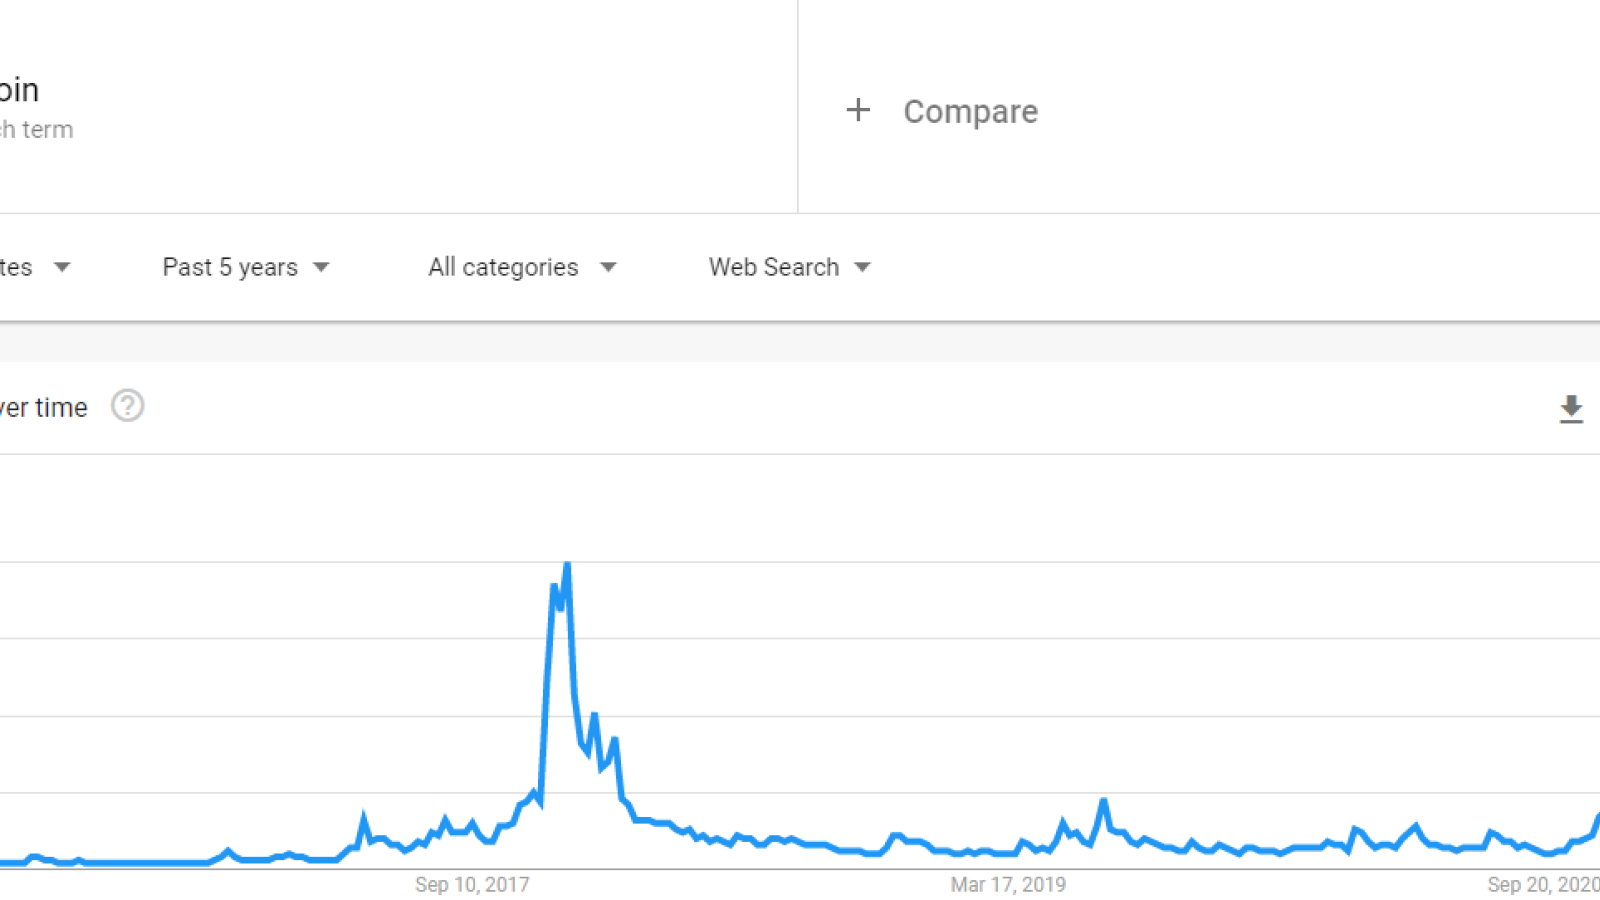 Google Trends: BTC is half as popular as it was in 2017